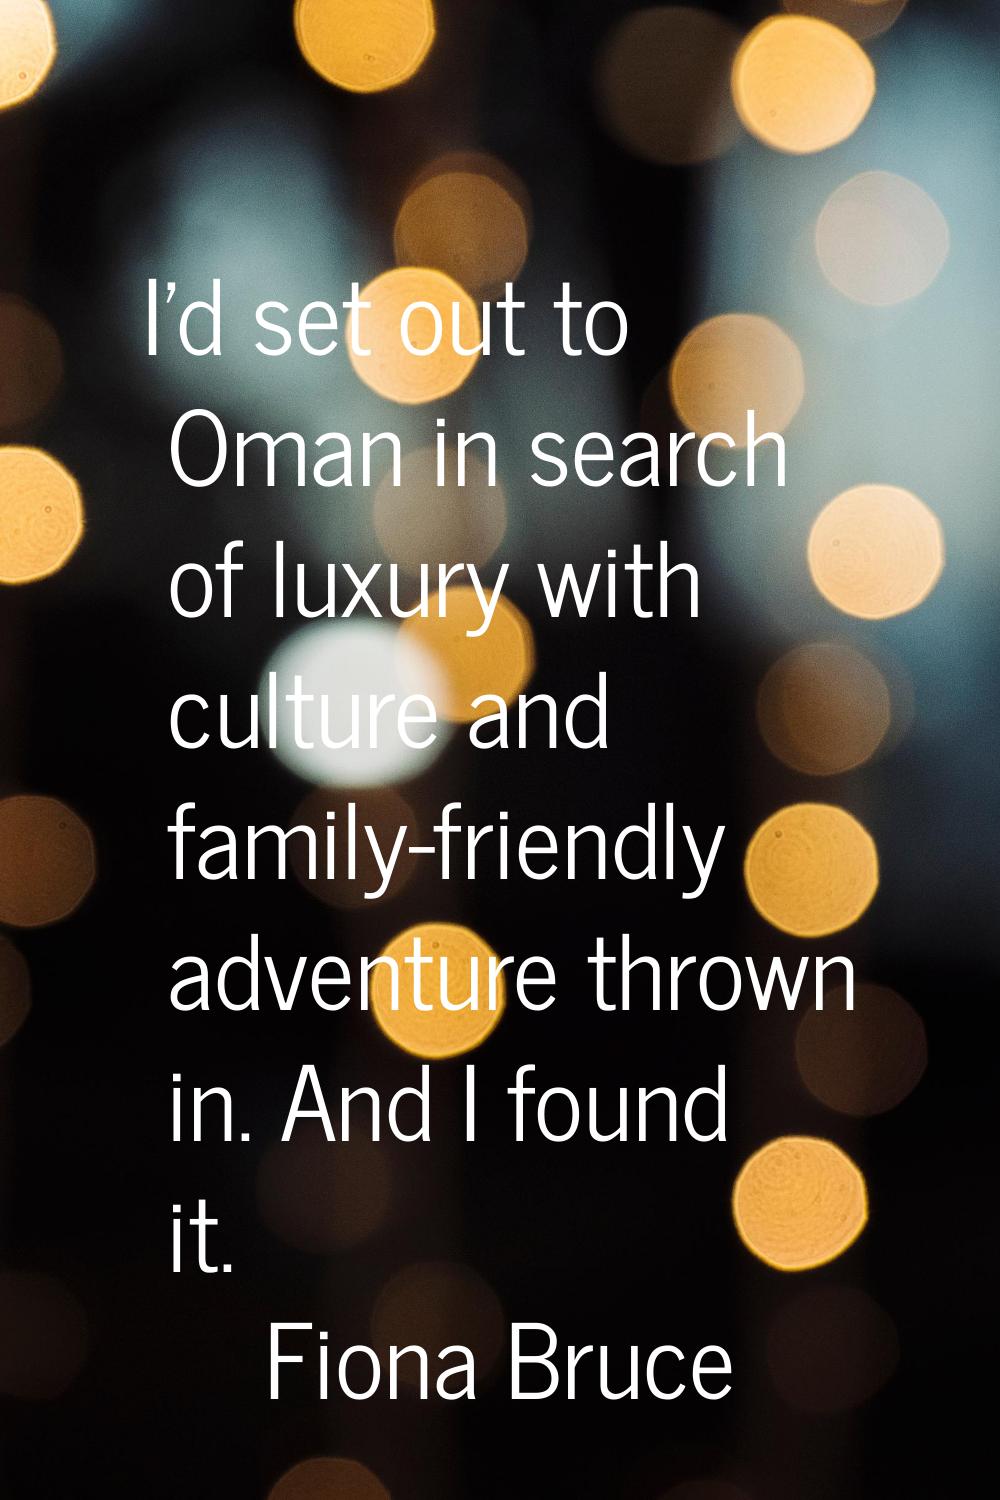 I'd set out to Oman in search of luxury with culture and family-friendly adventure thrown in. And I